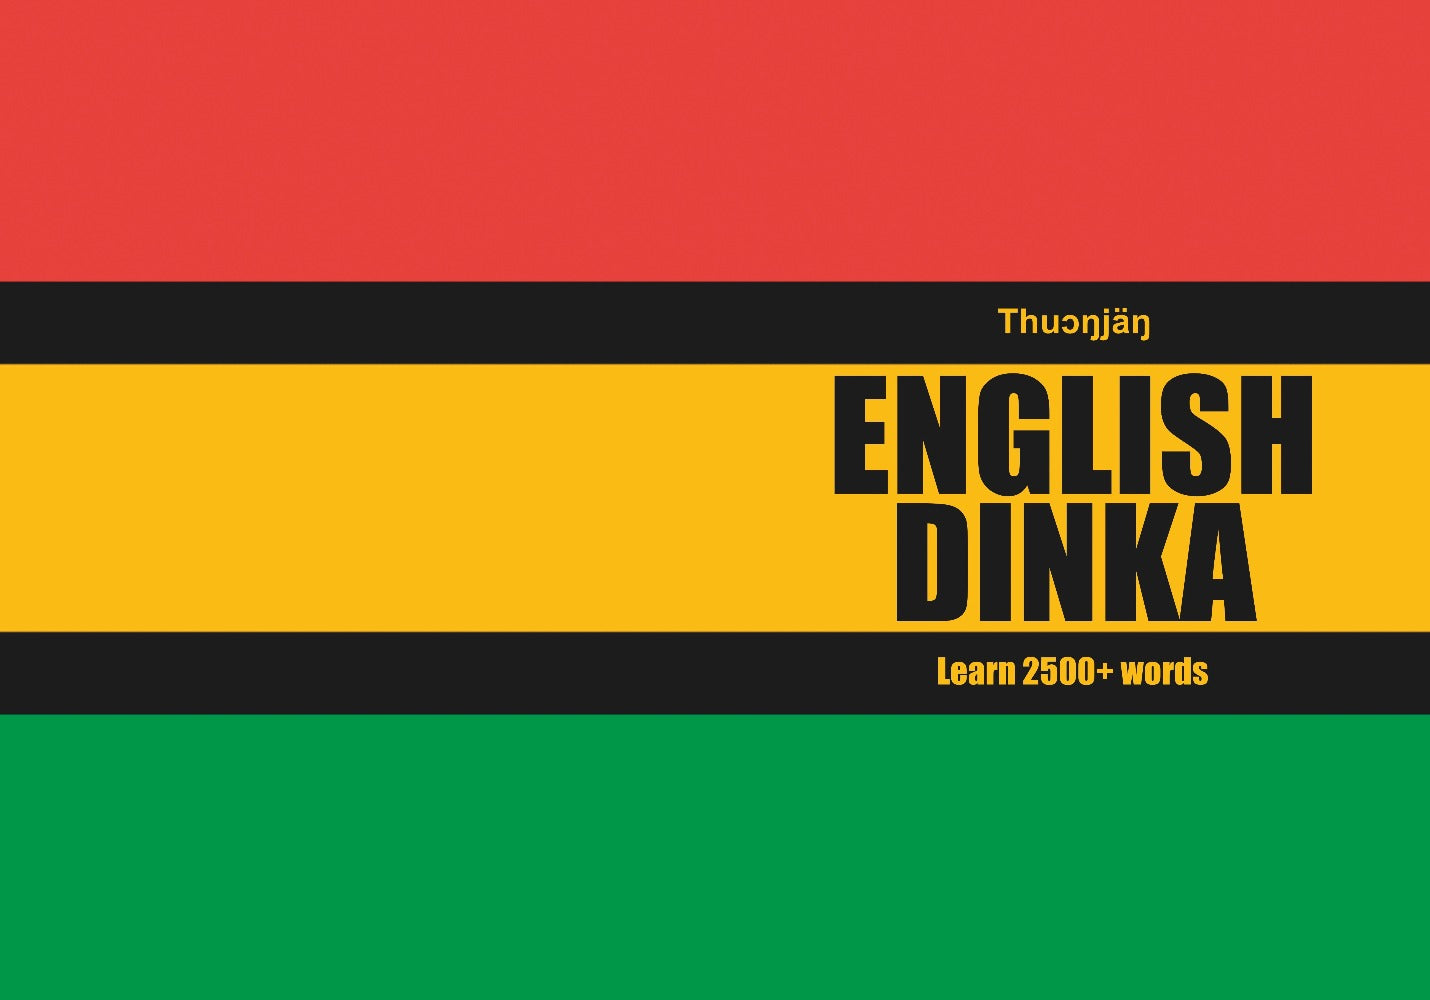 Dinka language learning notebook cover